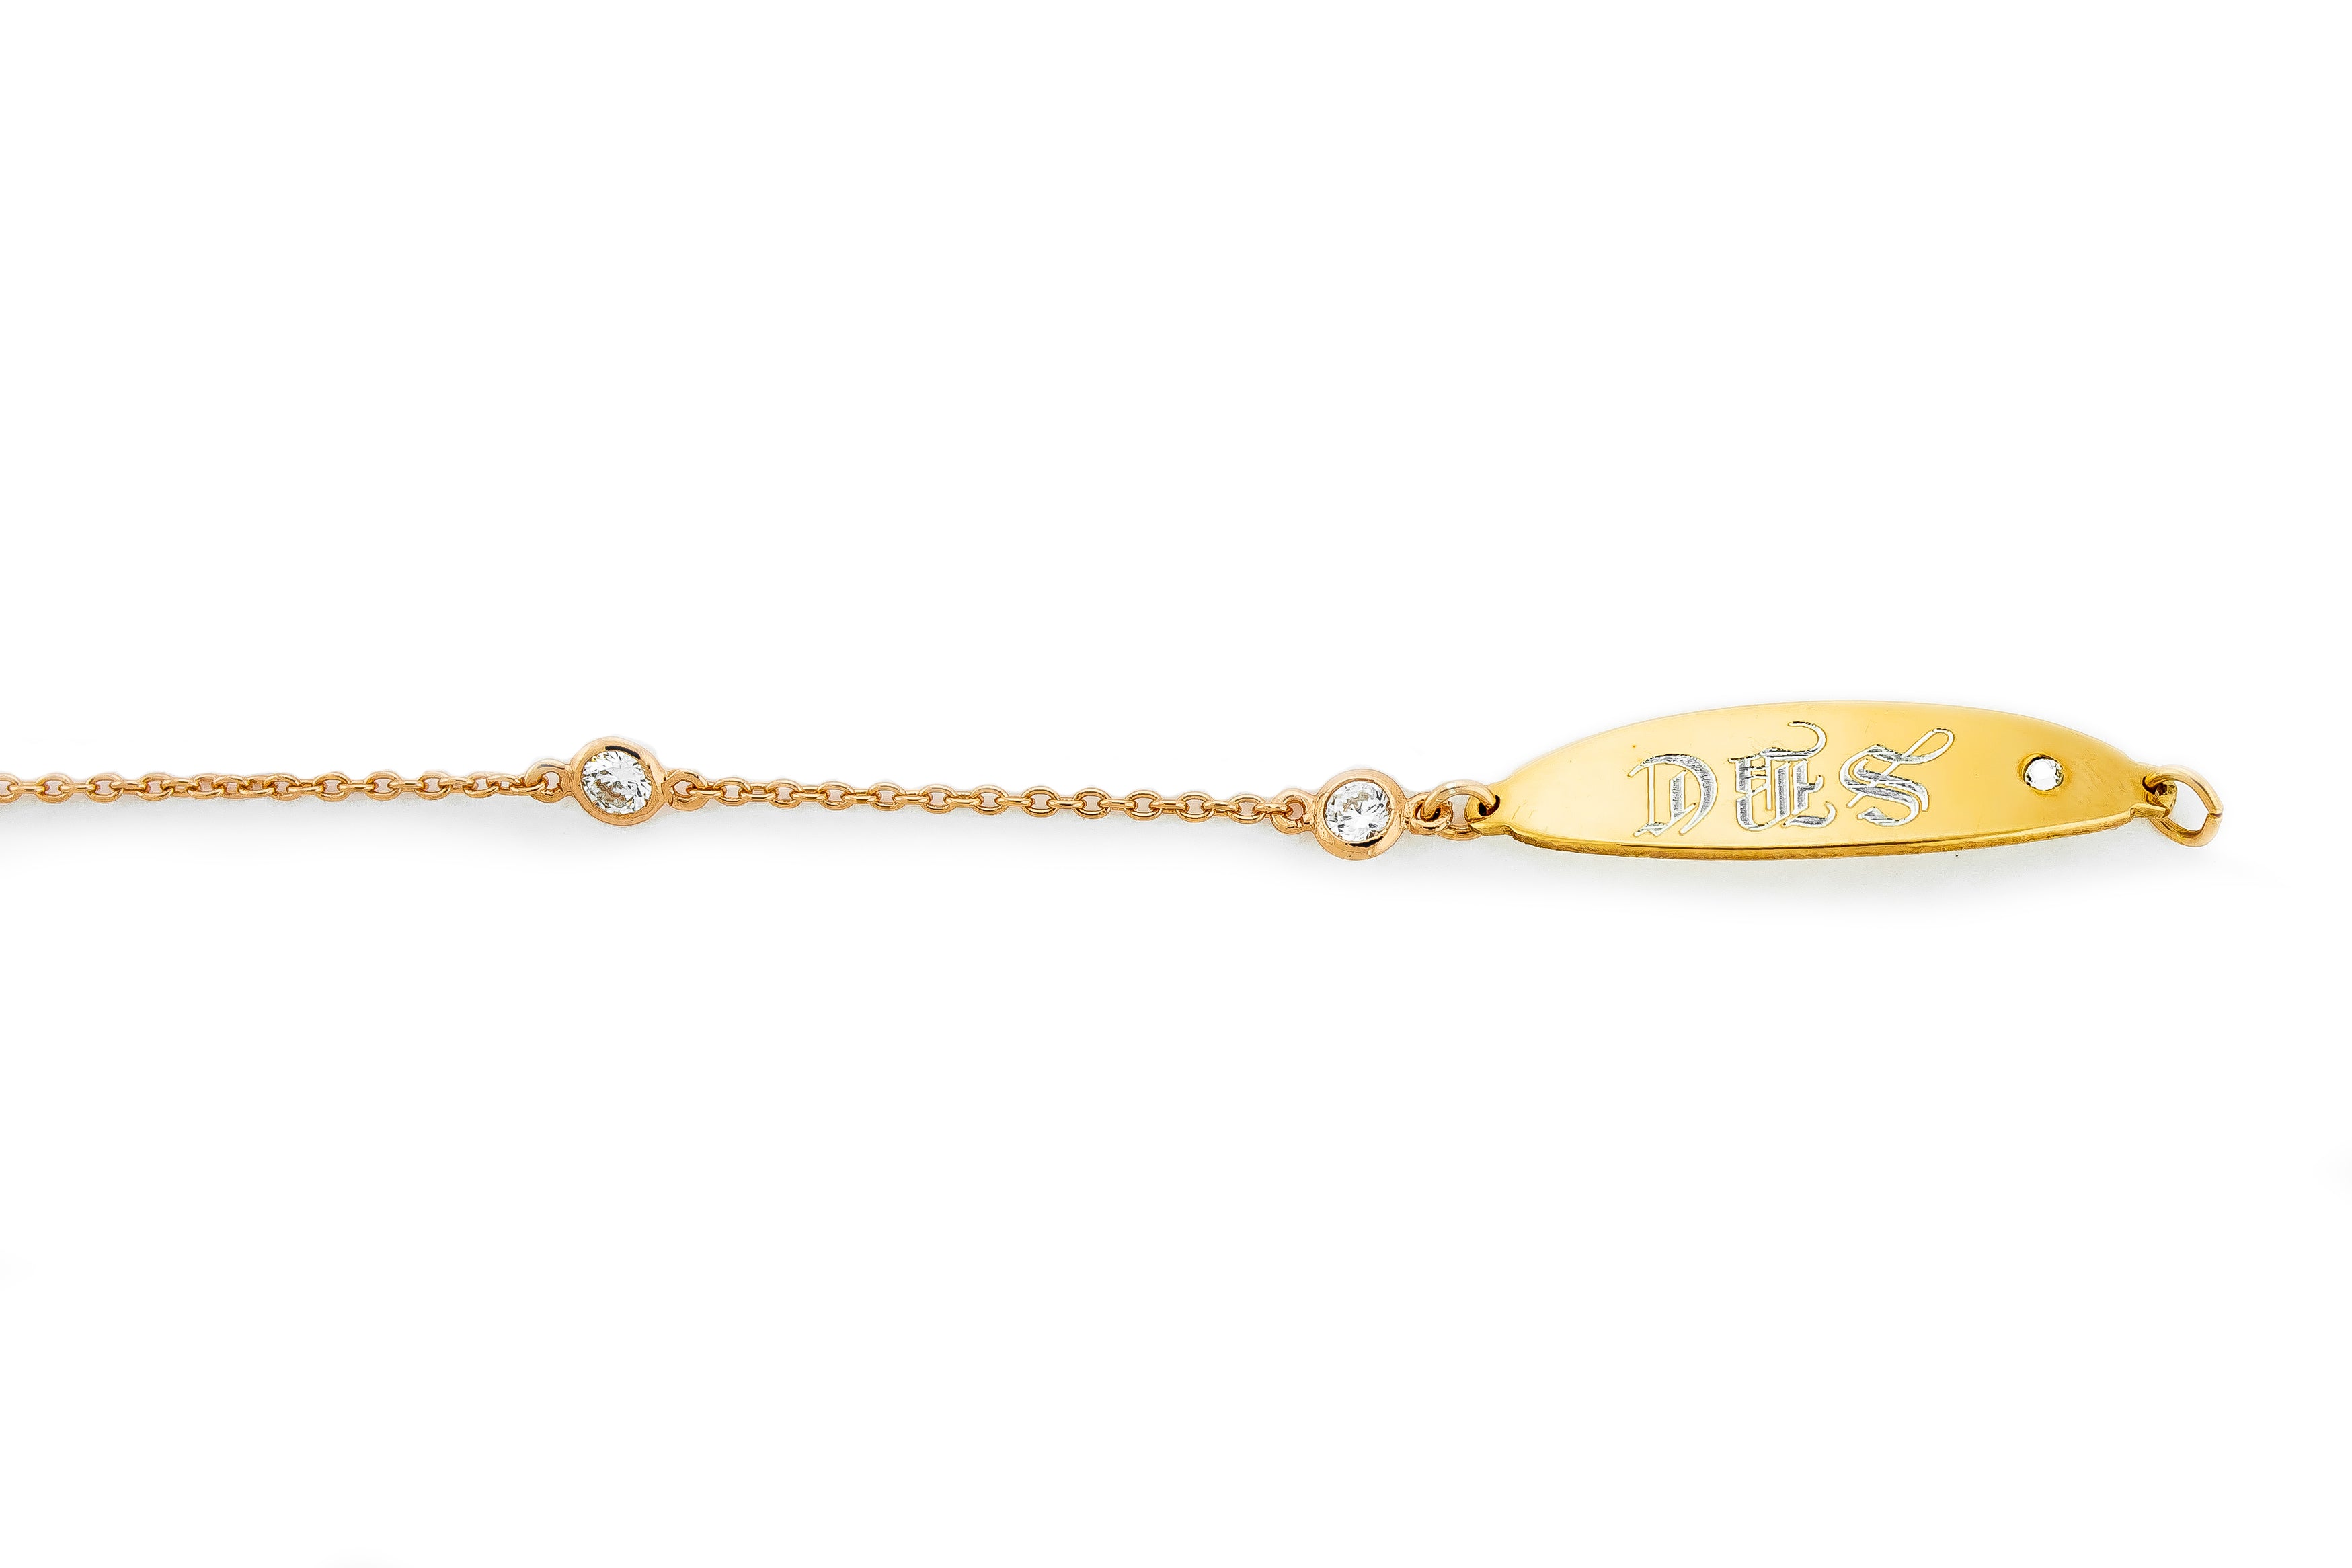 Initial Bracelet in Rose Gold Plated Sterling Silver with CZ Letters P